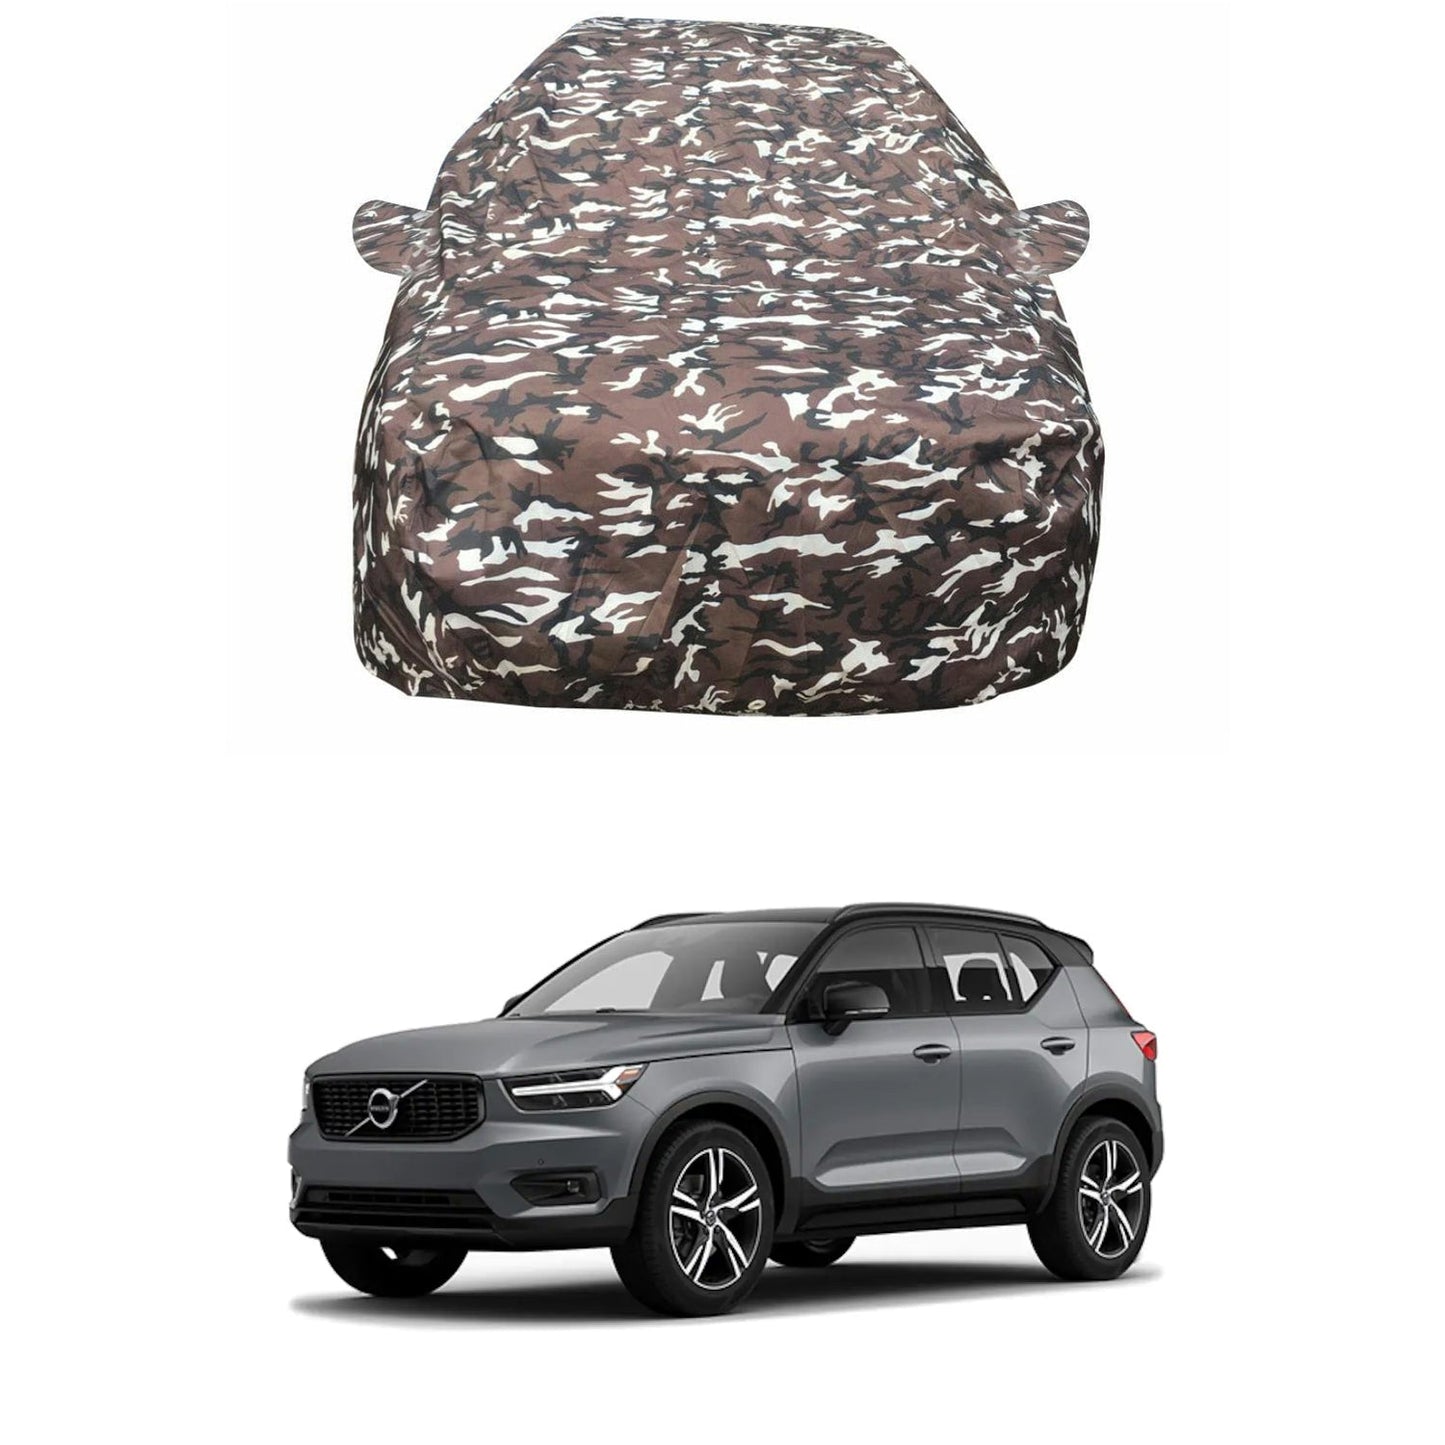 Oshotto Ranger Design Made of 100% Waterproof Fabric Car Body Cover with Mirror Pockets For Volvo XC40/V40